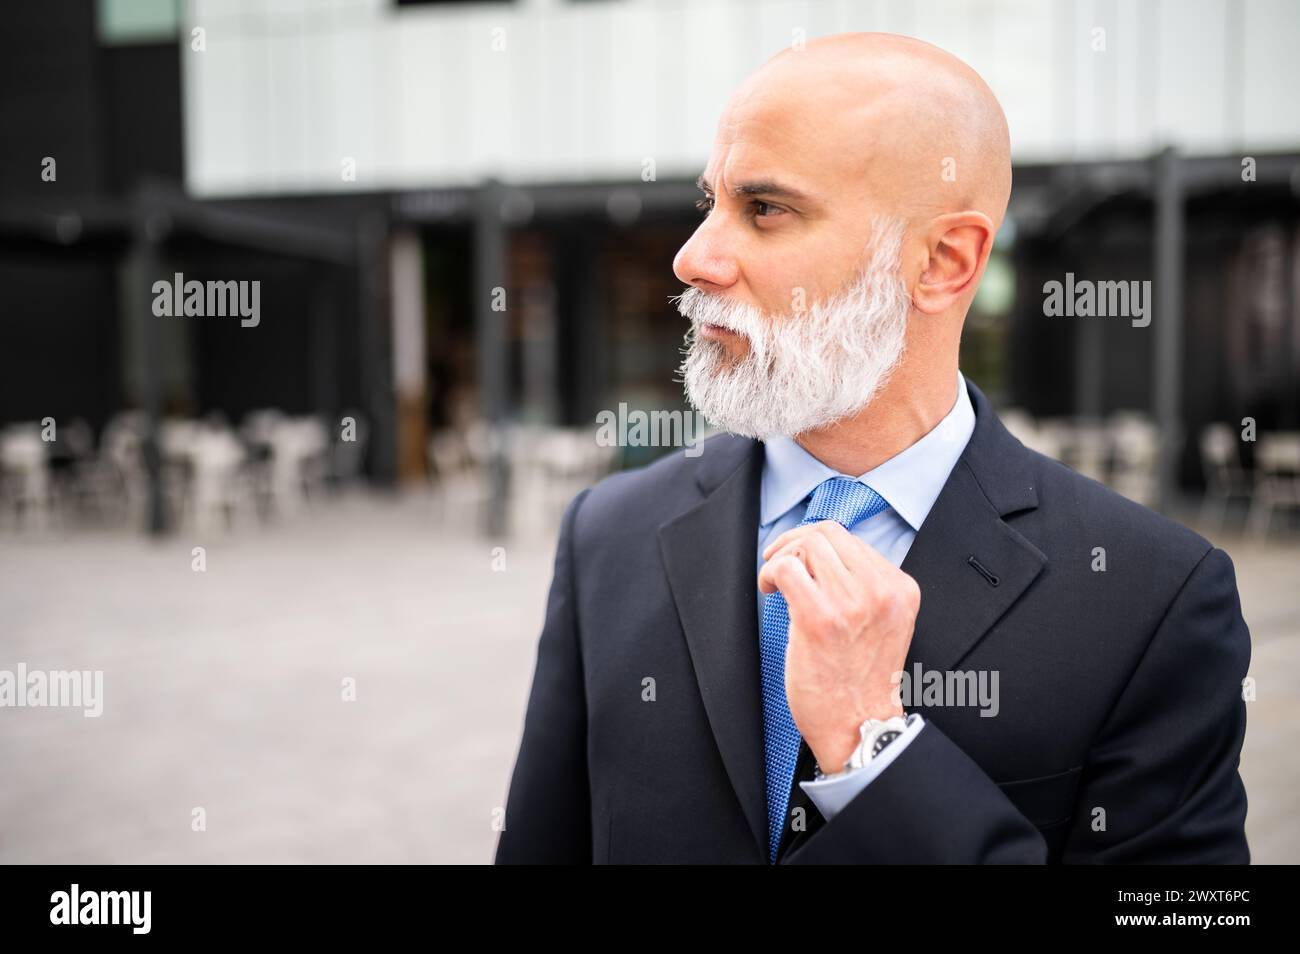 Mature bald stylish business man portrait with a white beard outdoor adjusting his necktie Stock Photo